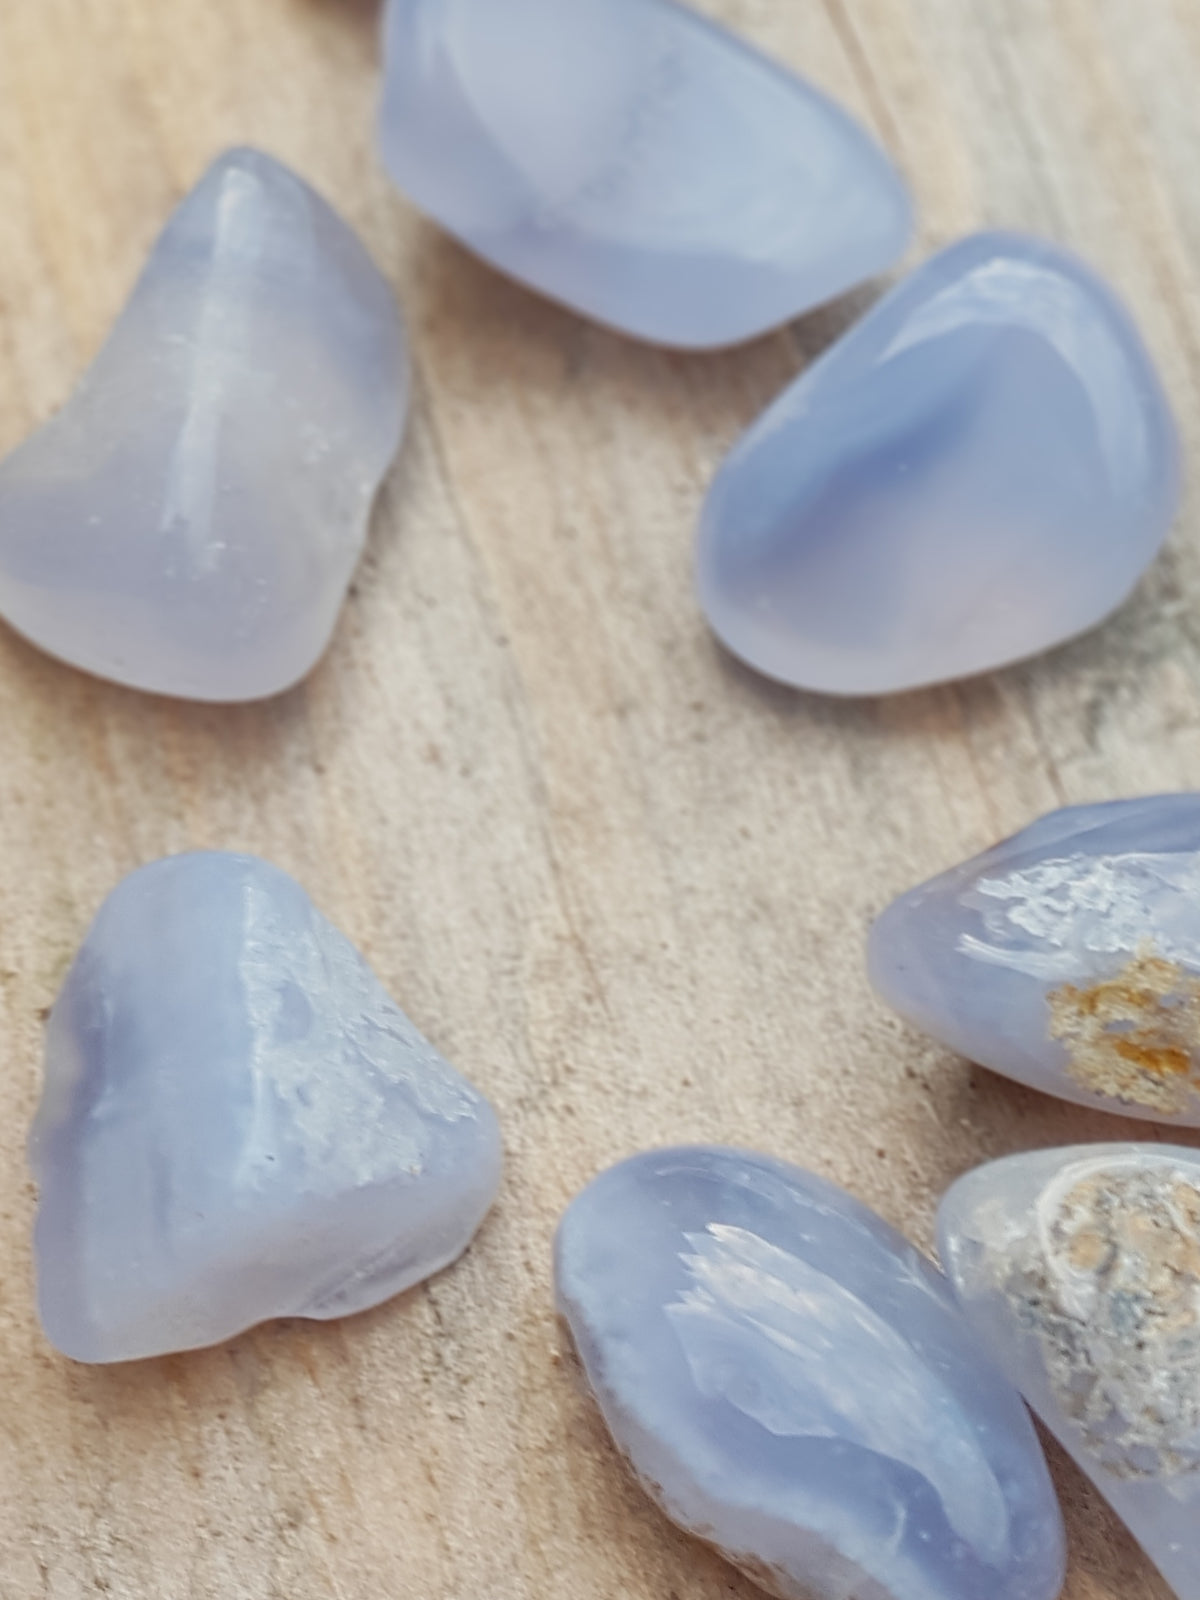 Seven small polished pieces of blue chalcedony. They are translucent. They are blue with some colour banding 